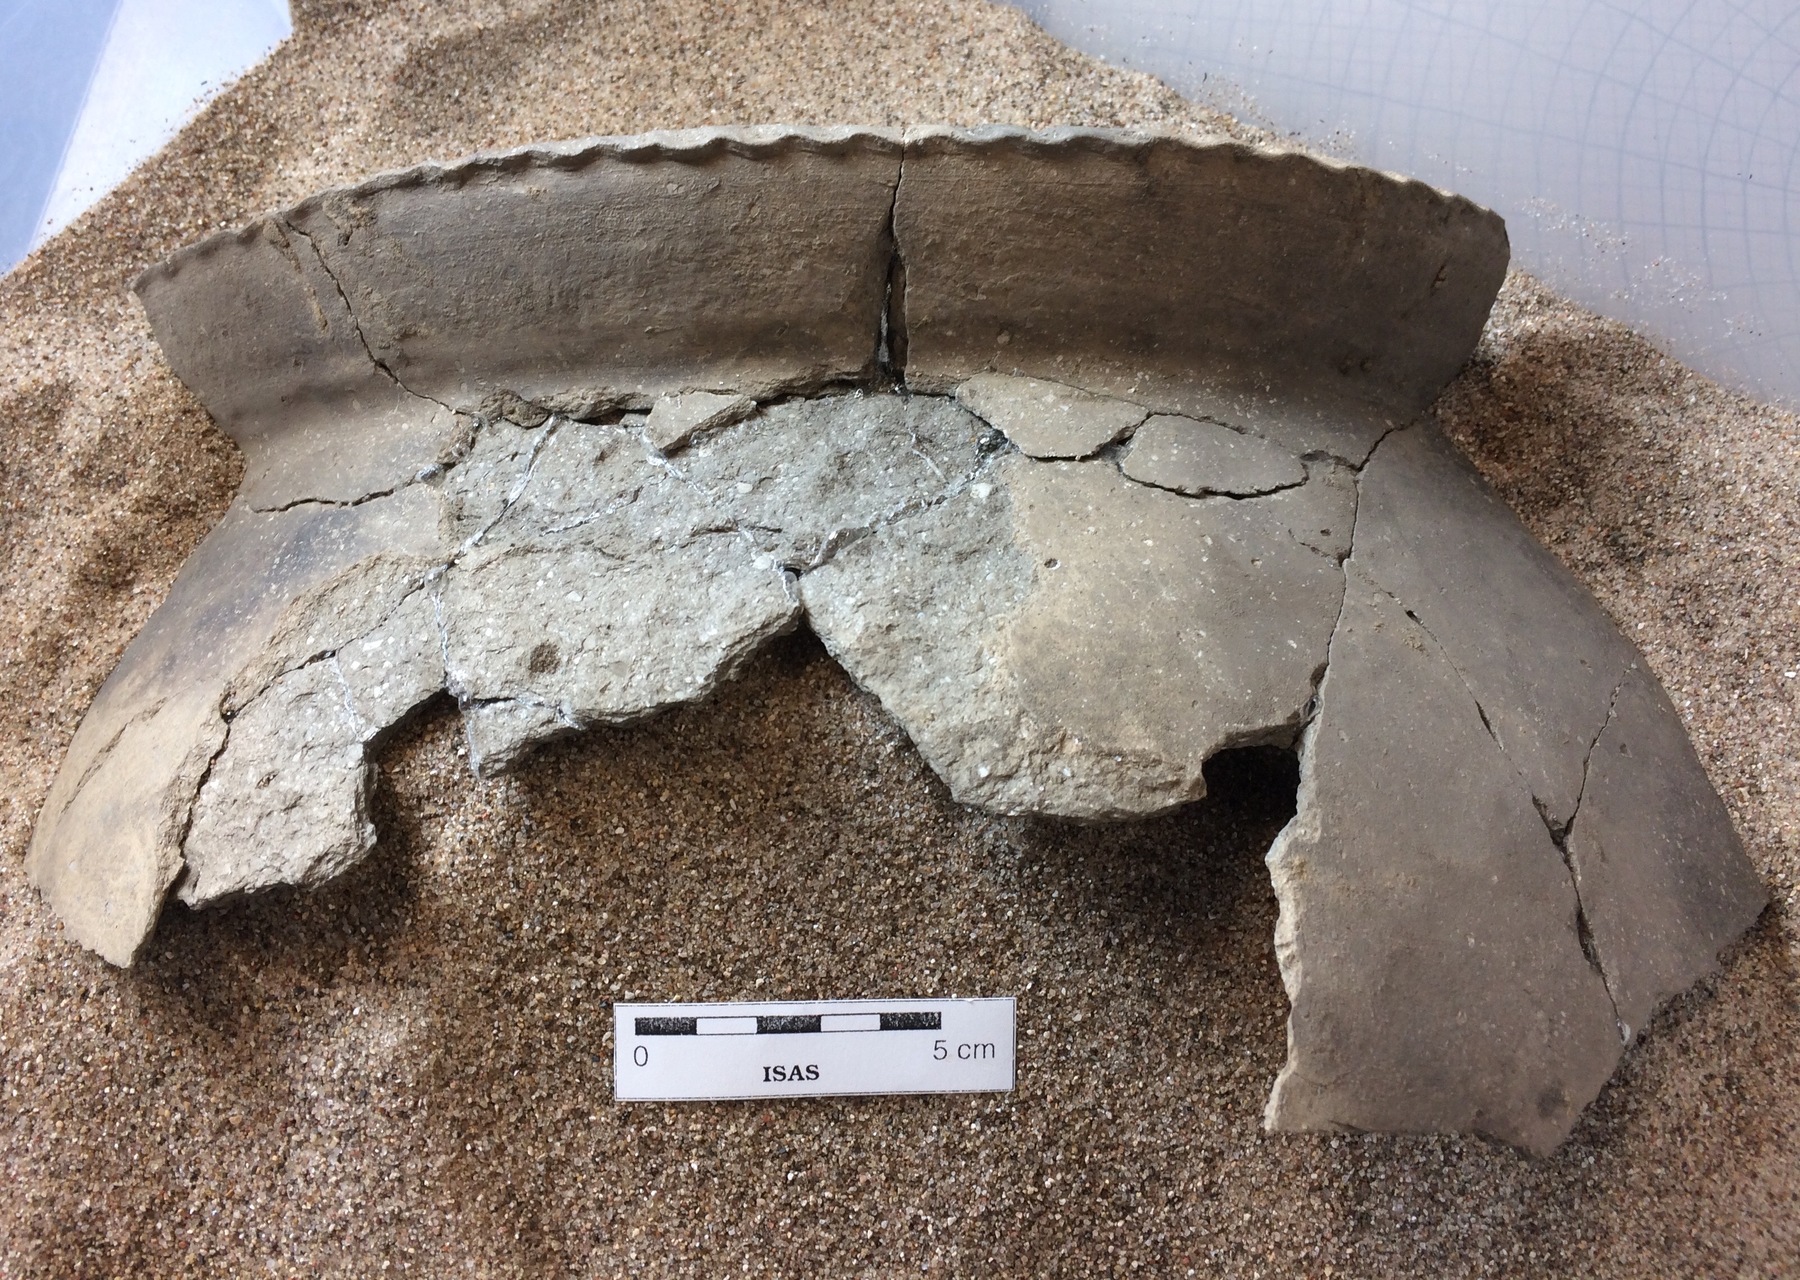 Pieces of a large ceramic vessel were found at the Cook County site and were partially reconstructed.